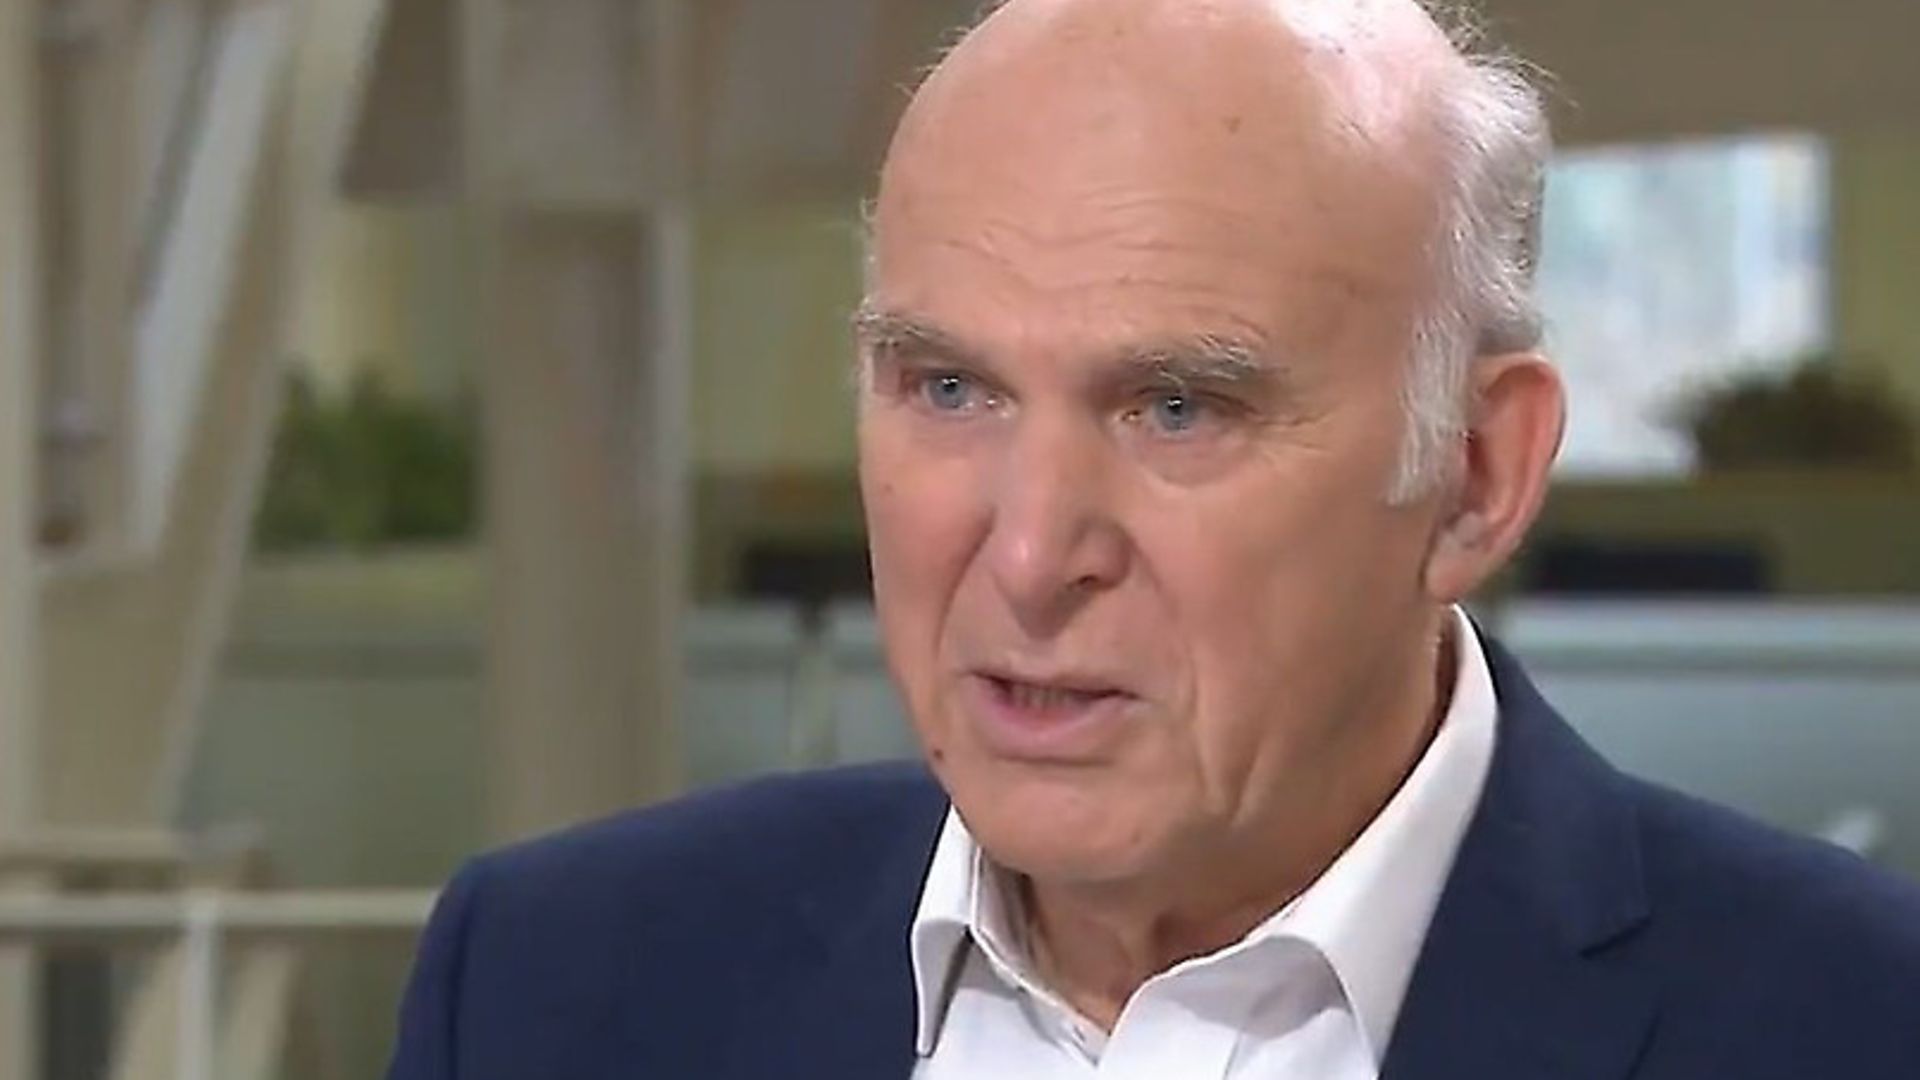 Sir Vince Cable, seen here on Sky News, told BBC's Today programme that the Lib Dem revoke Article 50 promise is a 'distraction'. Photograph: Sky. - Credit: Archant